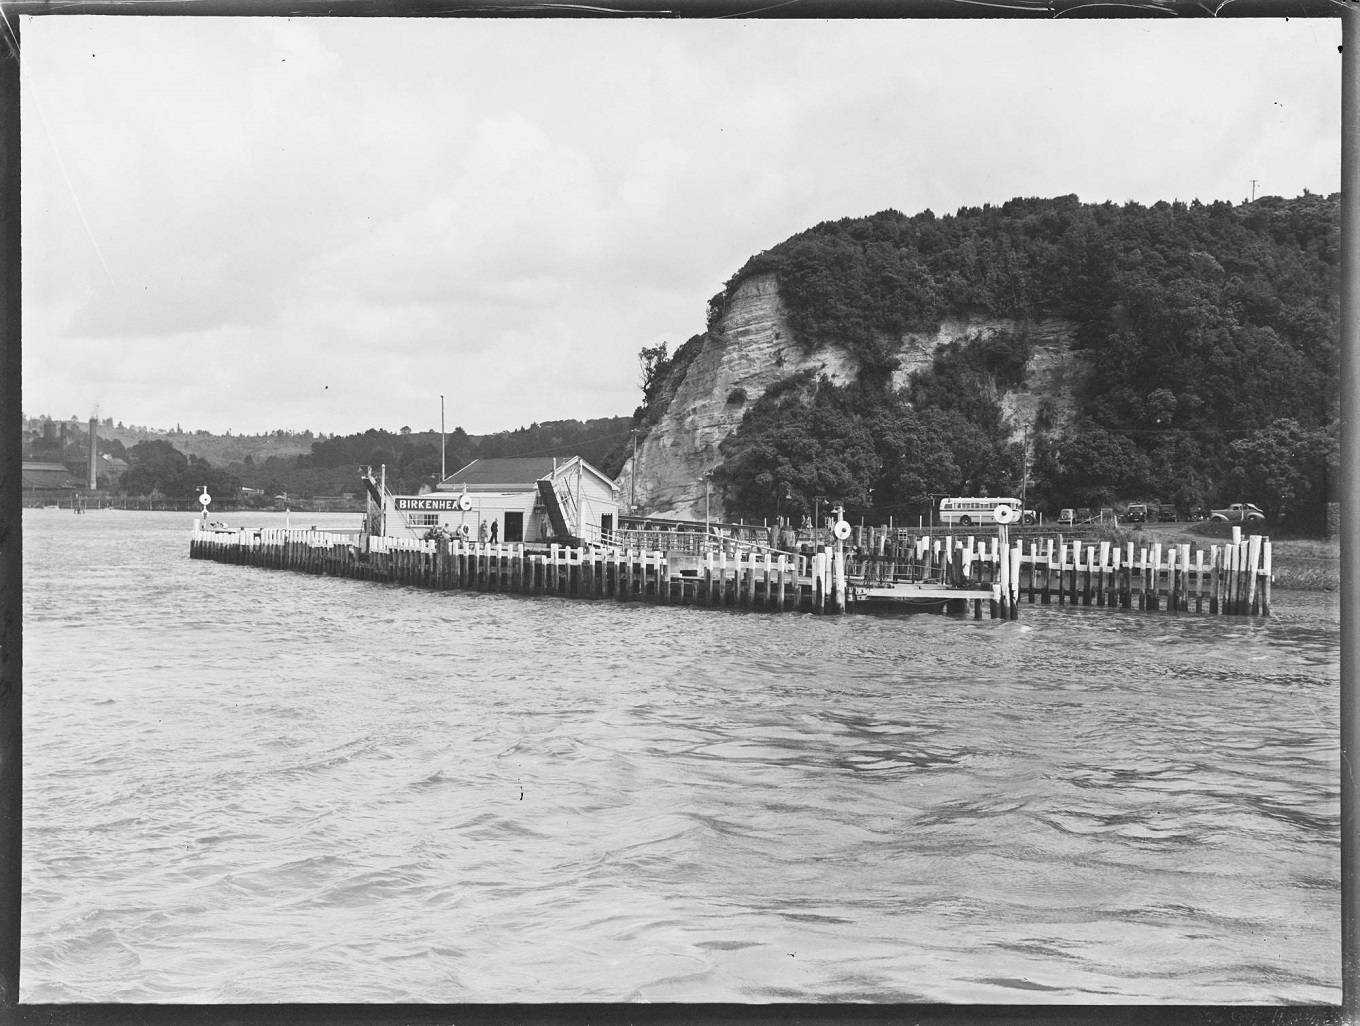 Birkenhead Wharf in the 1930s. Courtesy of the Courtesy of Auckland Libraries Heritage collection.